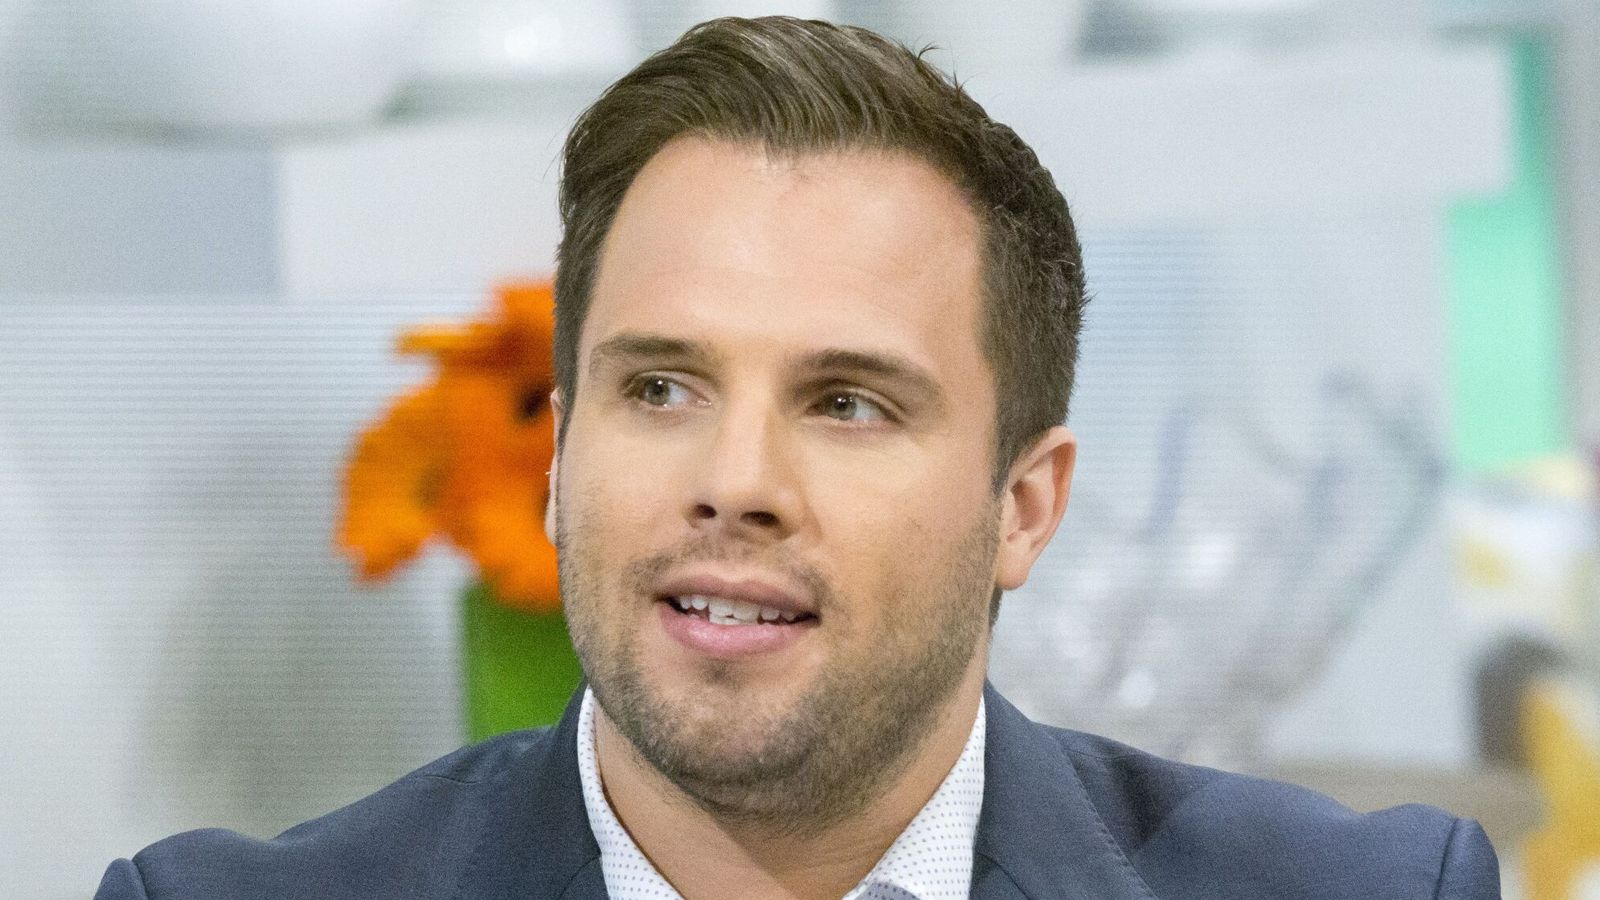 Ofcom announces official investigation into GB News over Laurence Fox comments on Dan Wootton's show